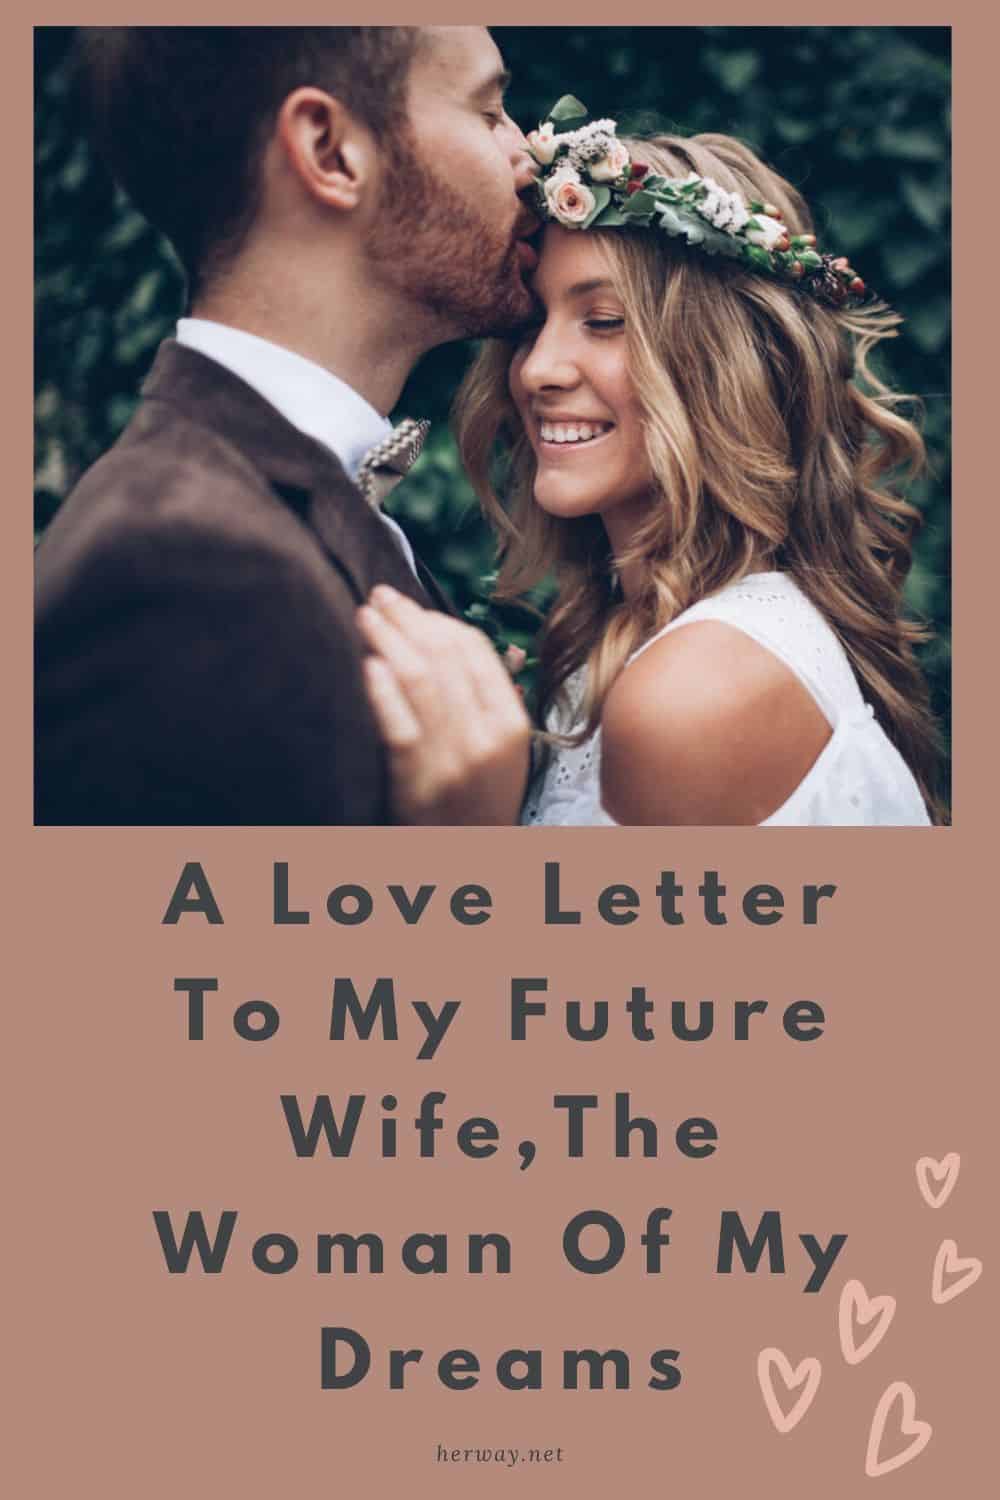 A Love Letter To My Future Wife,The Woman Of My Dreams